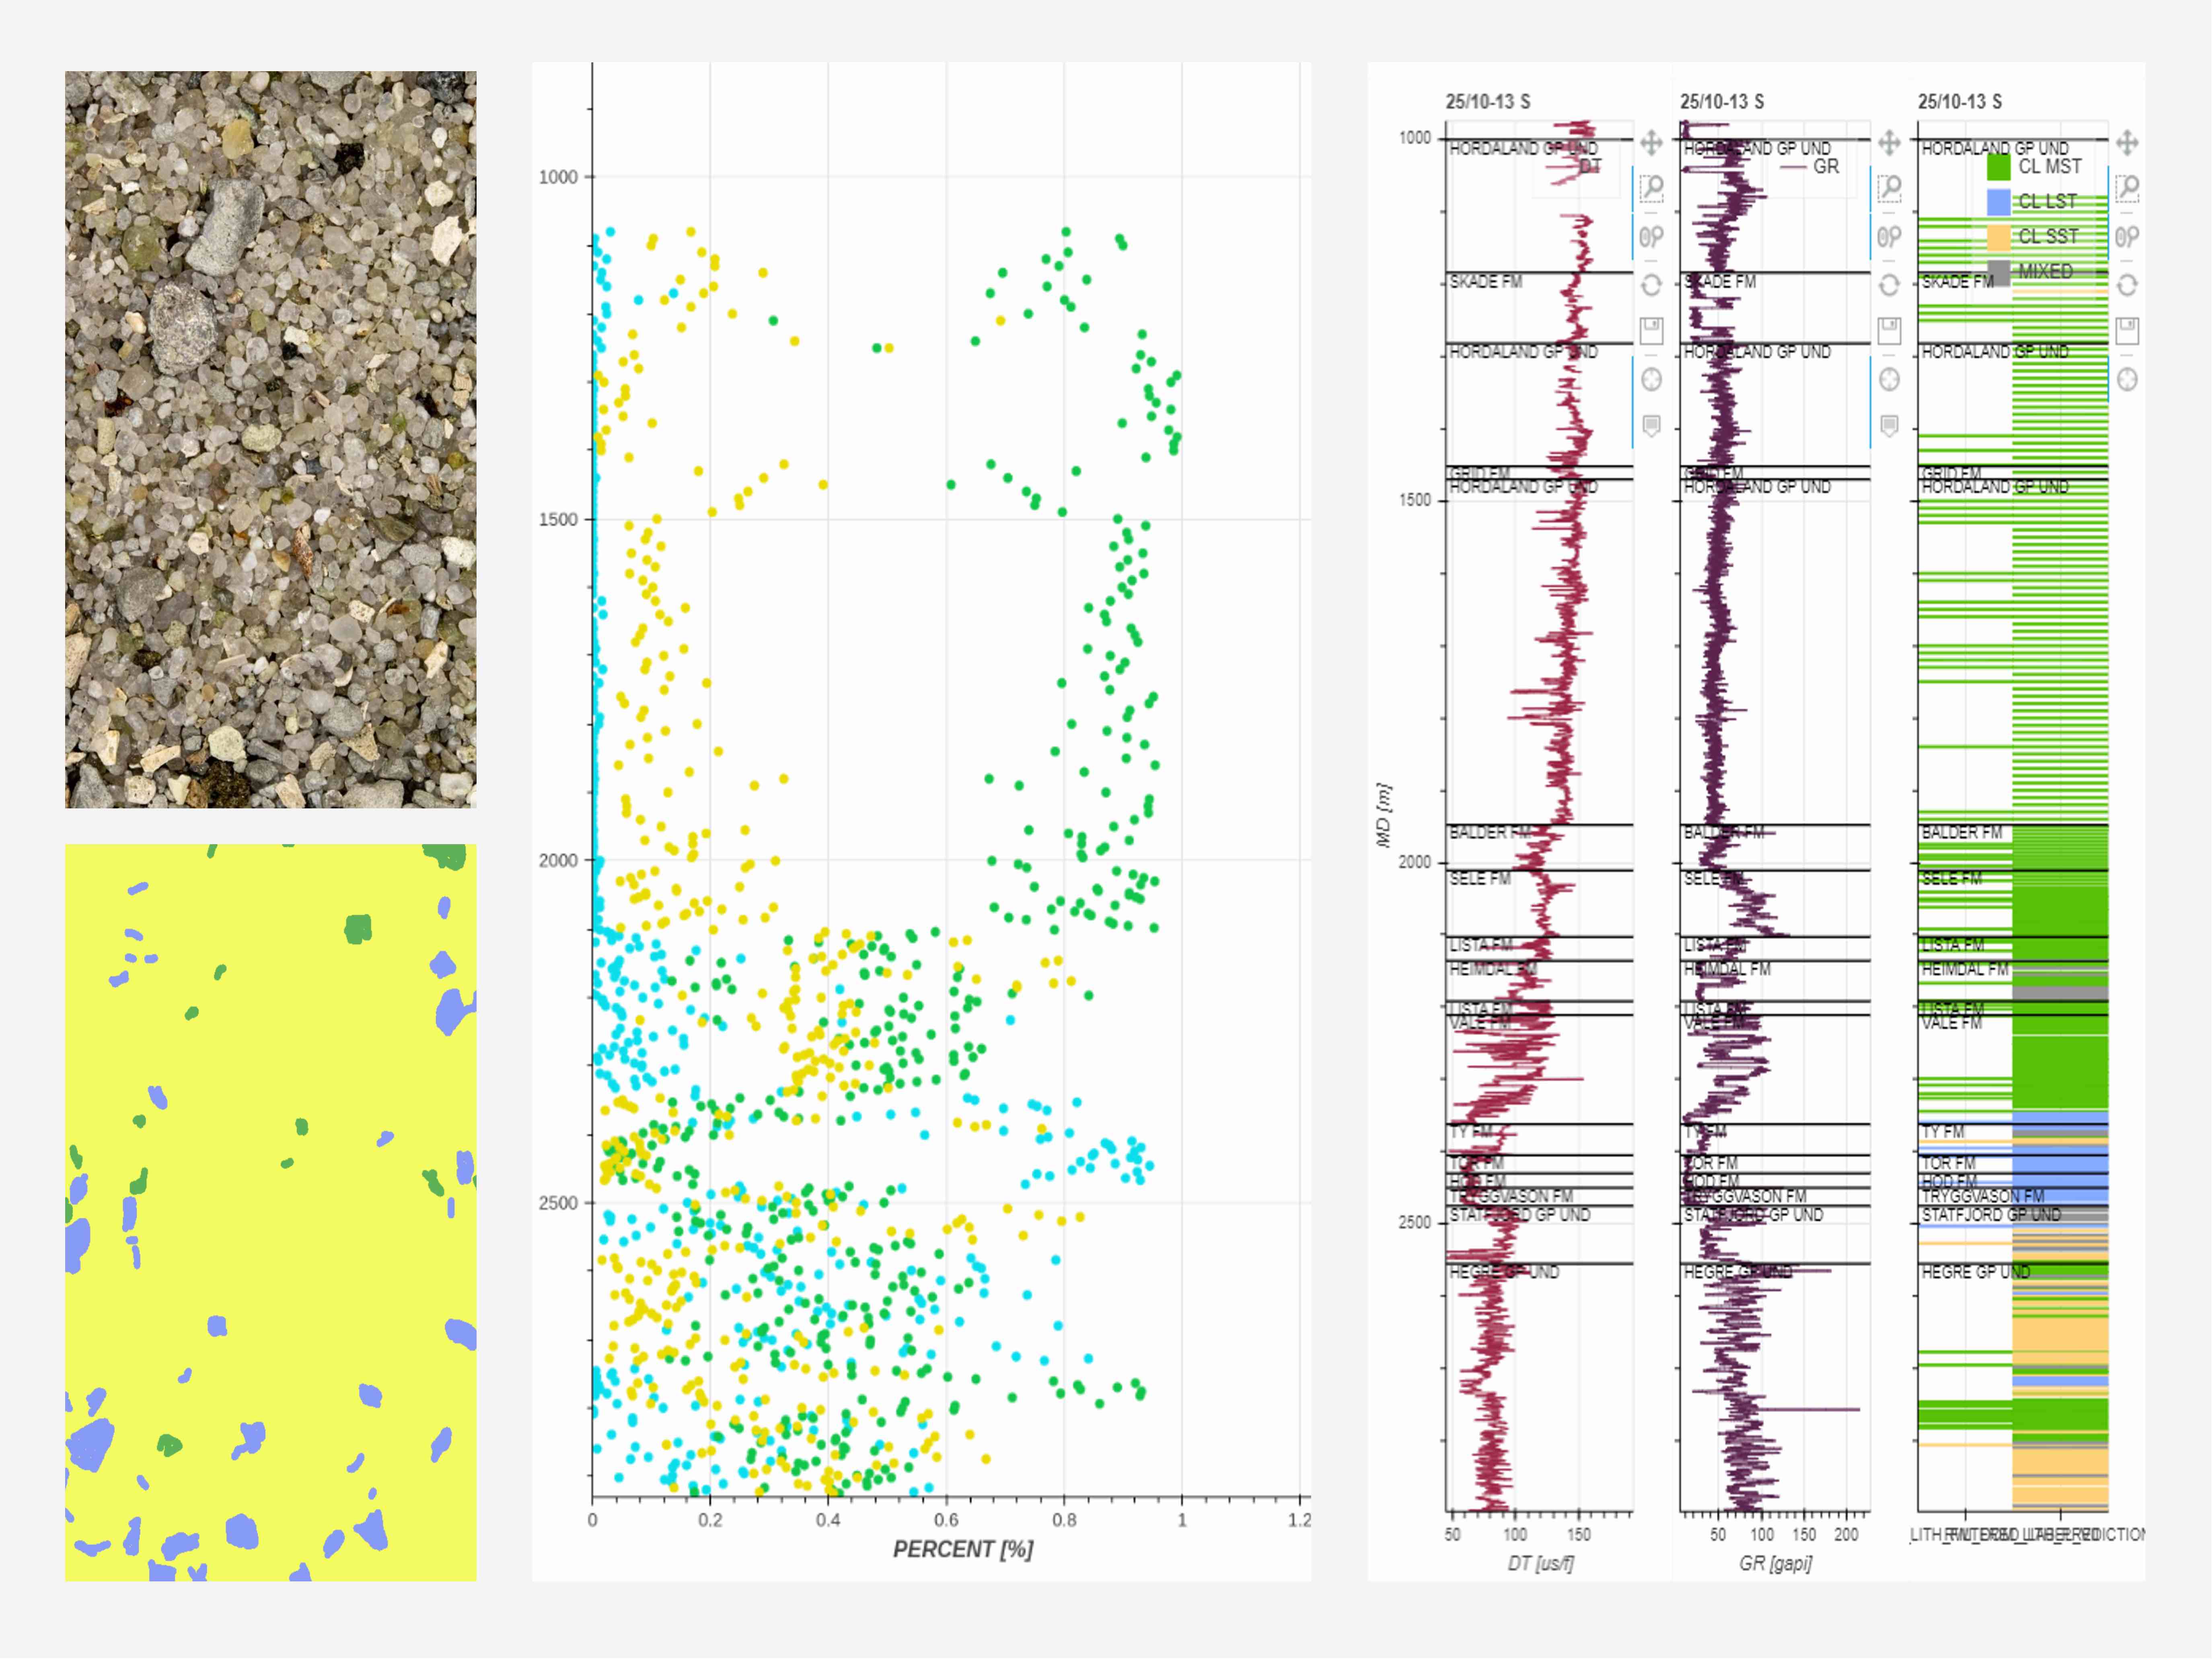 EarthNET Images - Improve geoscience workflows by incorporating rock samples